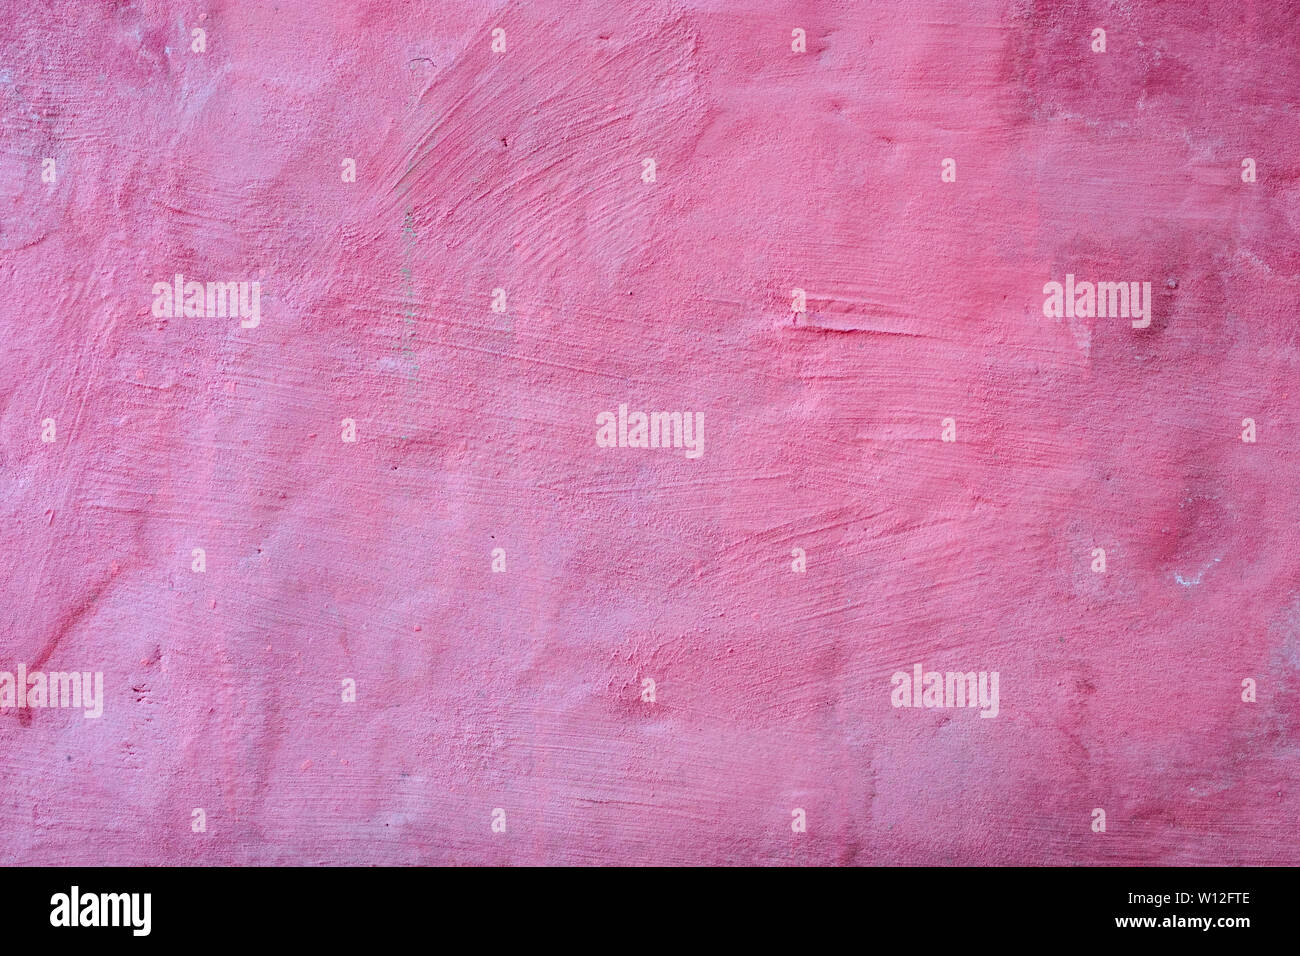 Texture of wall painted in pink Stock Photo